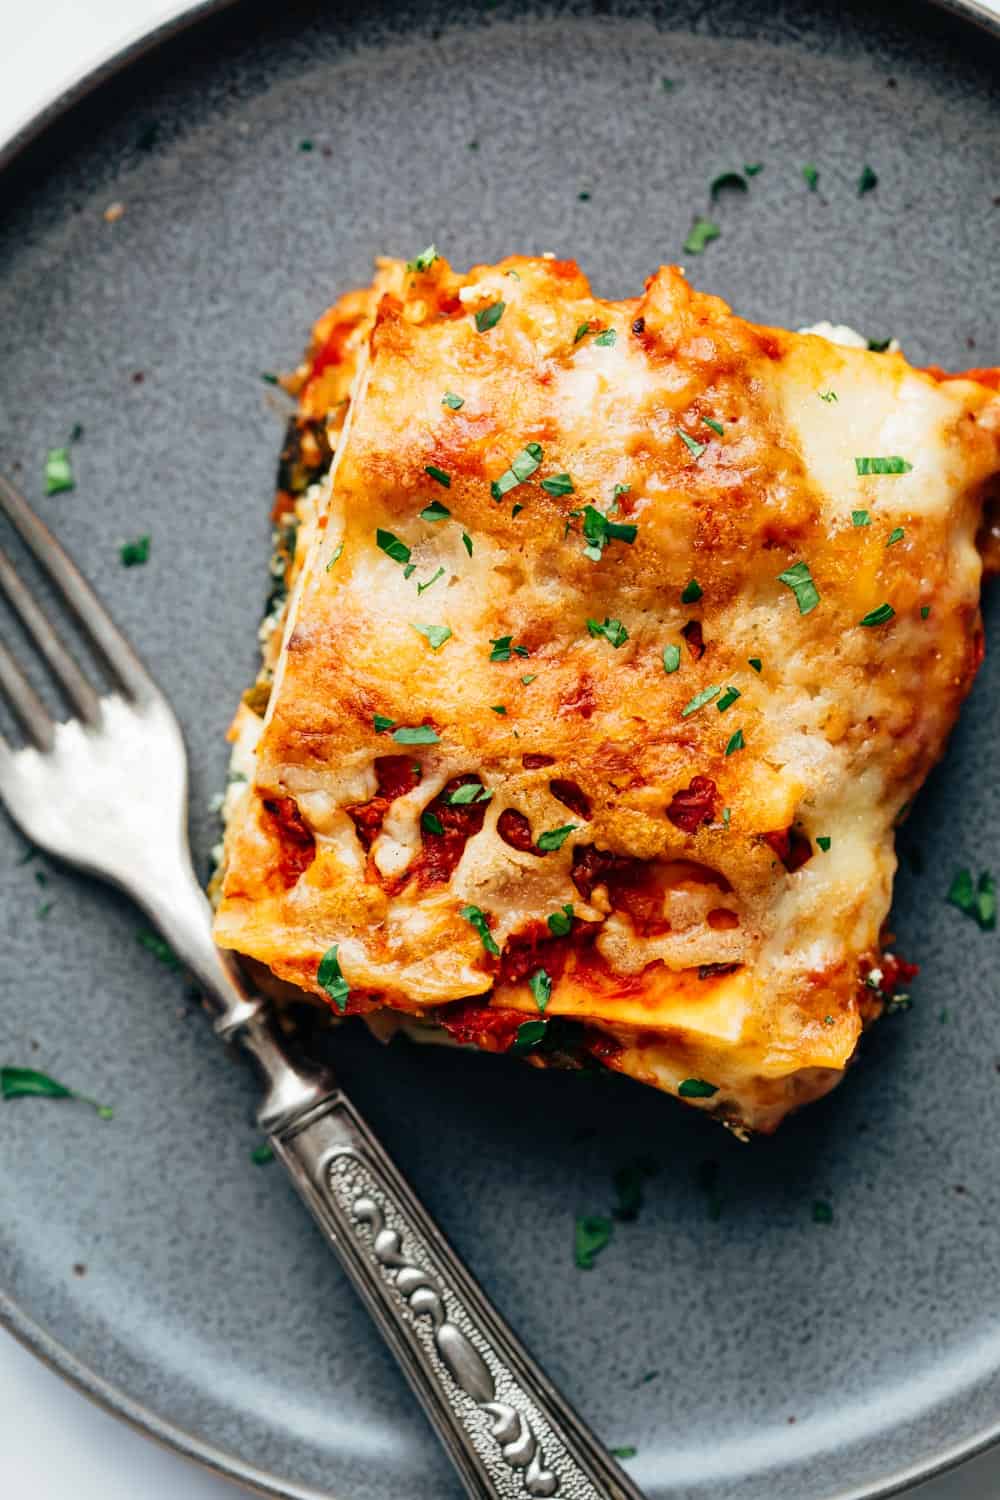 Slice of reheated frozen vegetarian lasagna on a plate